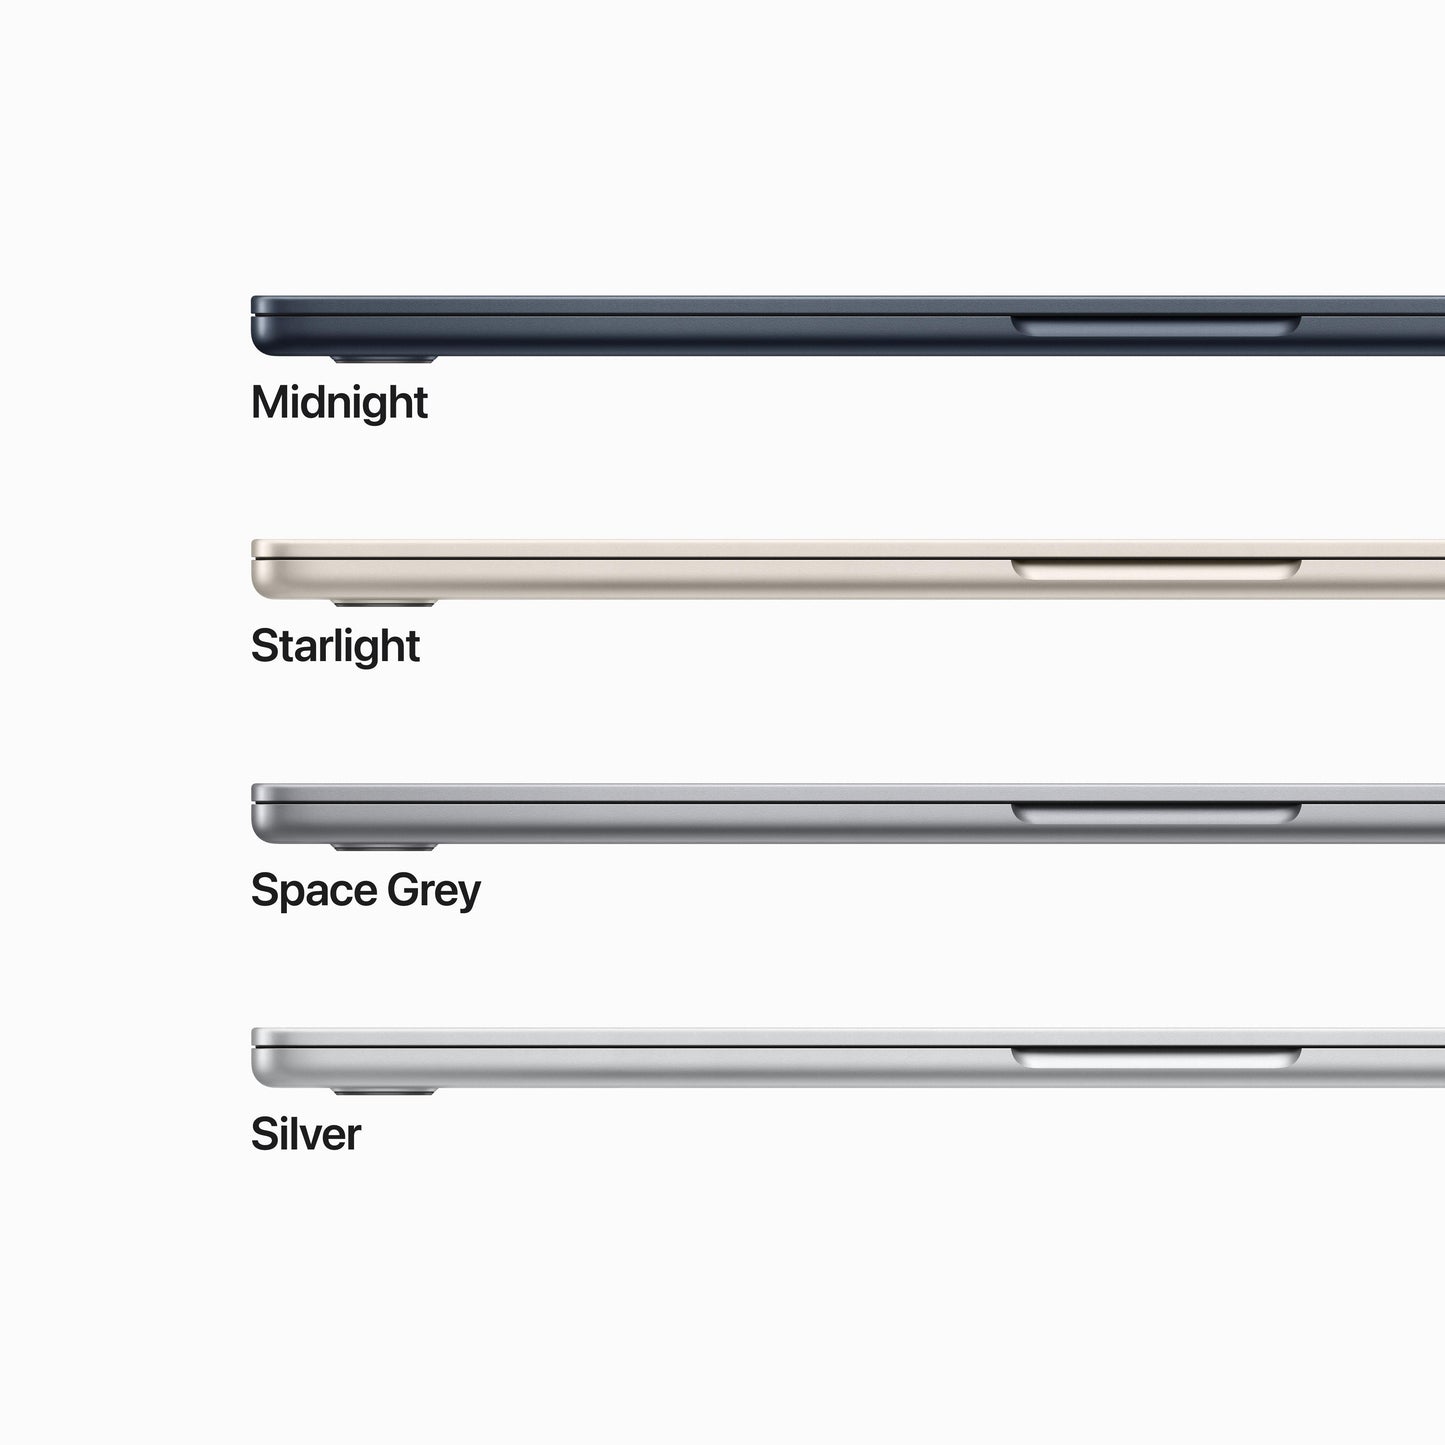 15-inch MacBook Air: Apple M2 chip with 8-core CPU and 10-core GPU, 256GB SSD - Space Grey